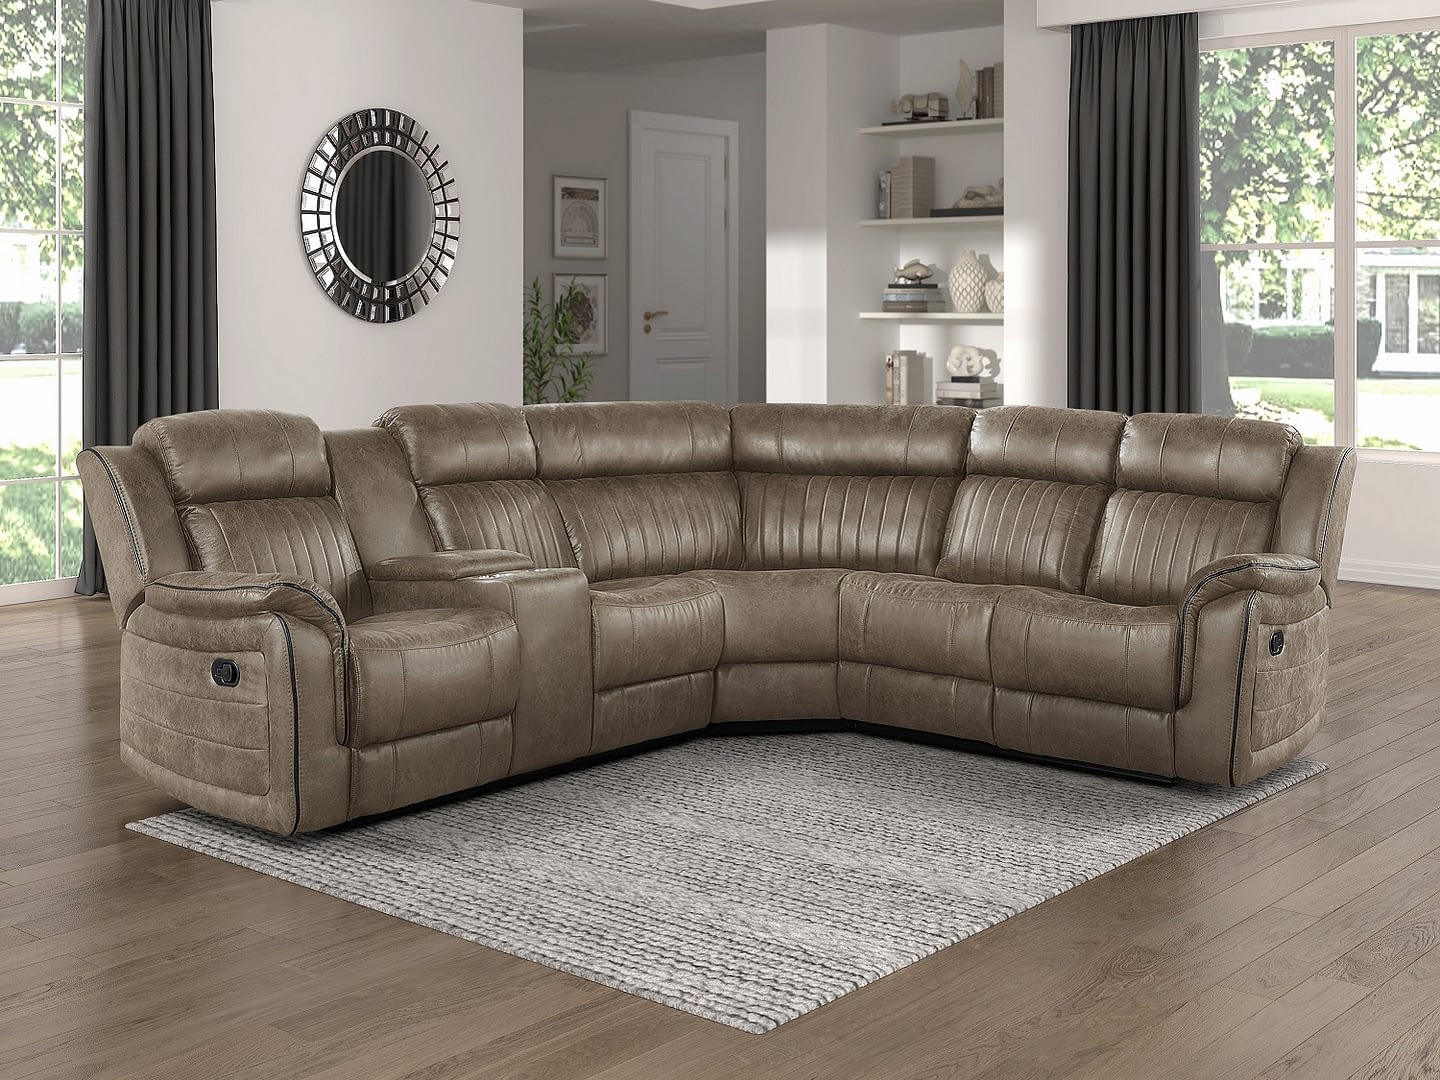 FERNLY Reclining Sectional with Console - Closed